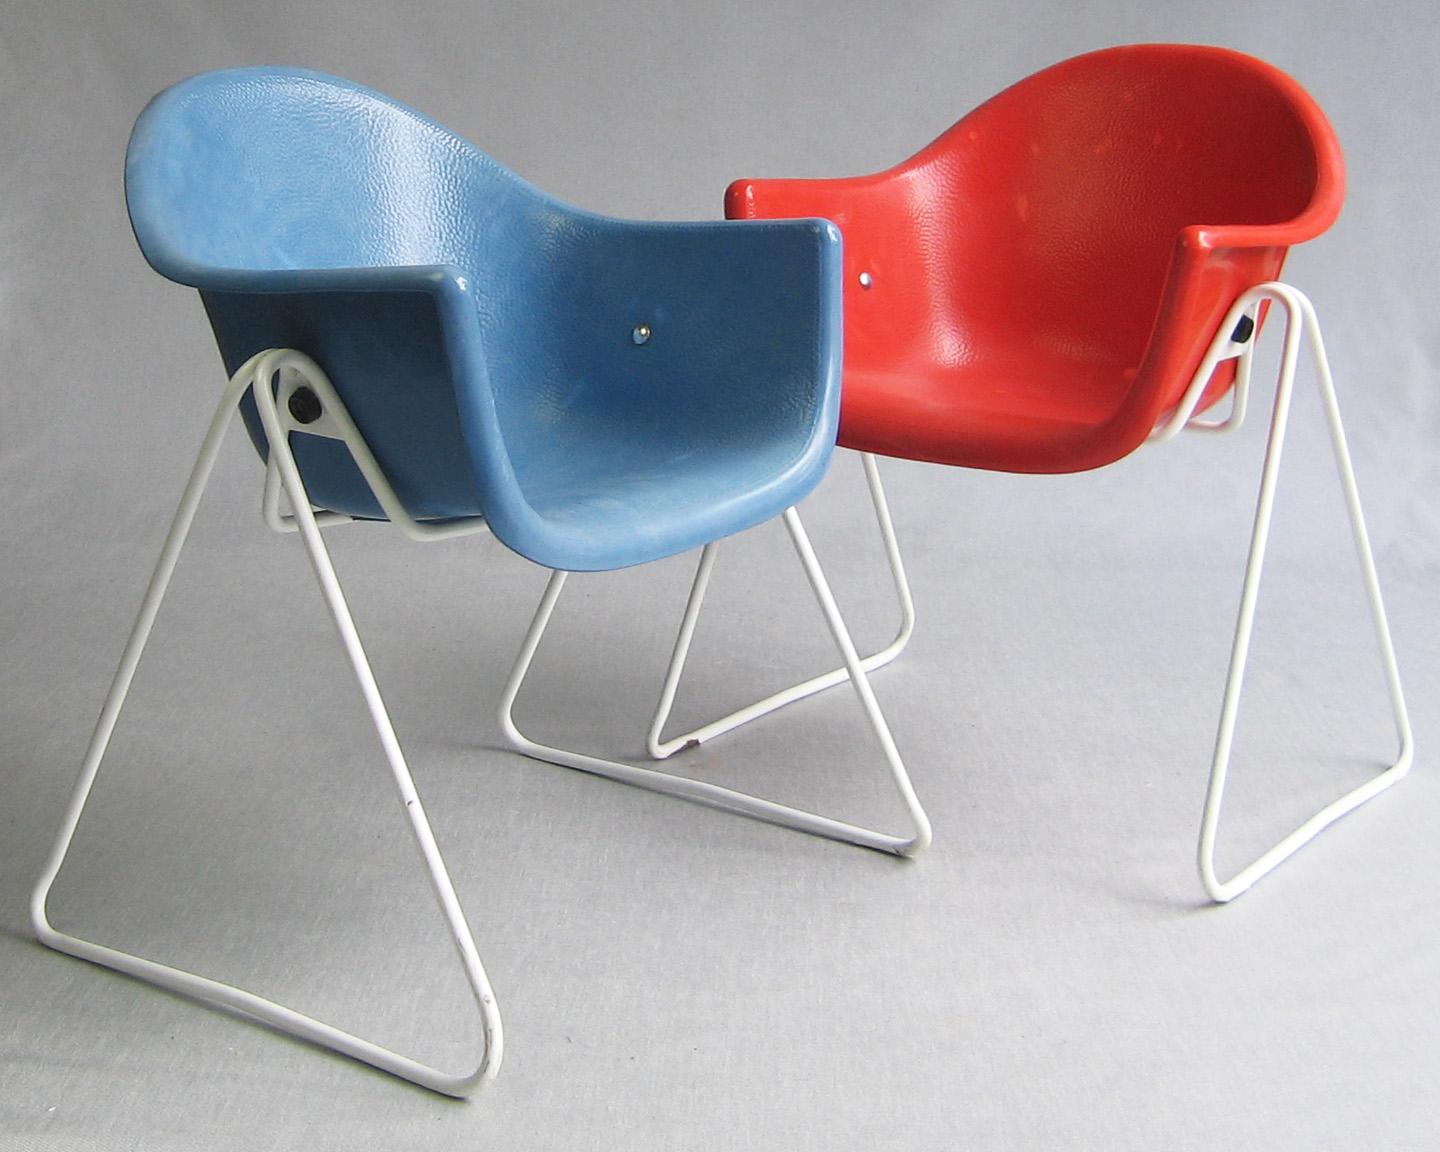 Mid-20th Century Pair of Walter Papst kids chairs, Wilkhahn, Germany 1961 - 1968 For Sale